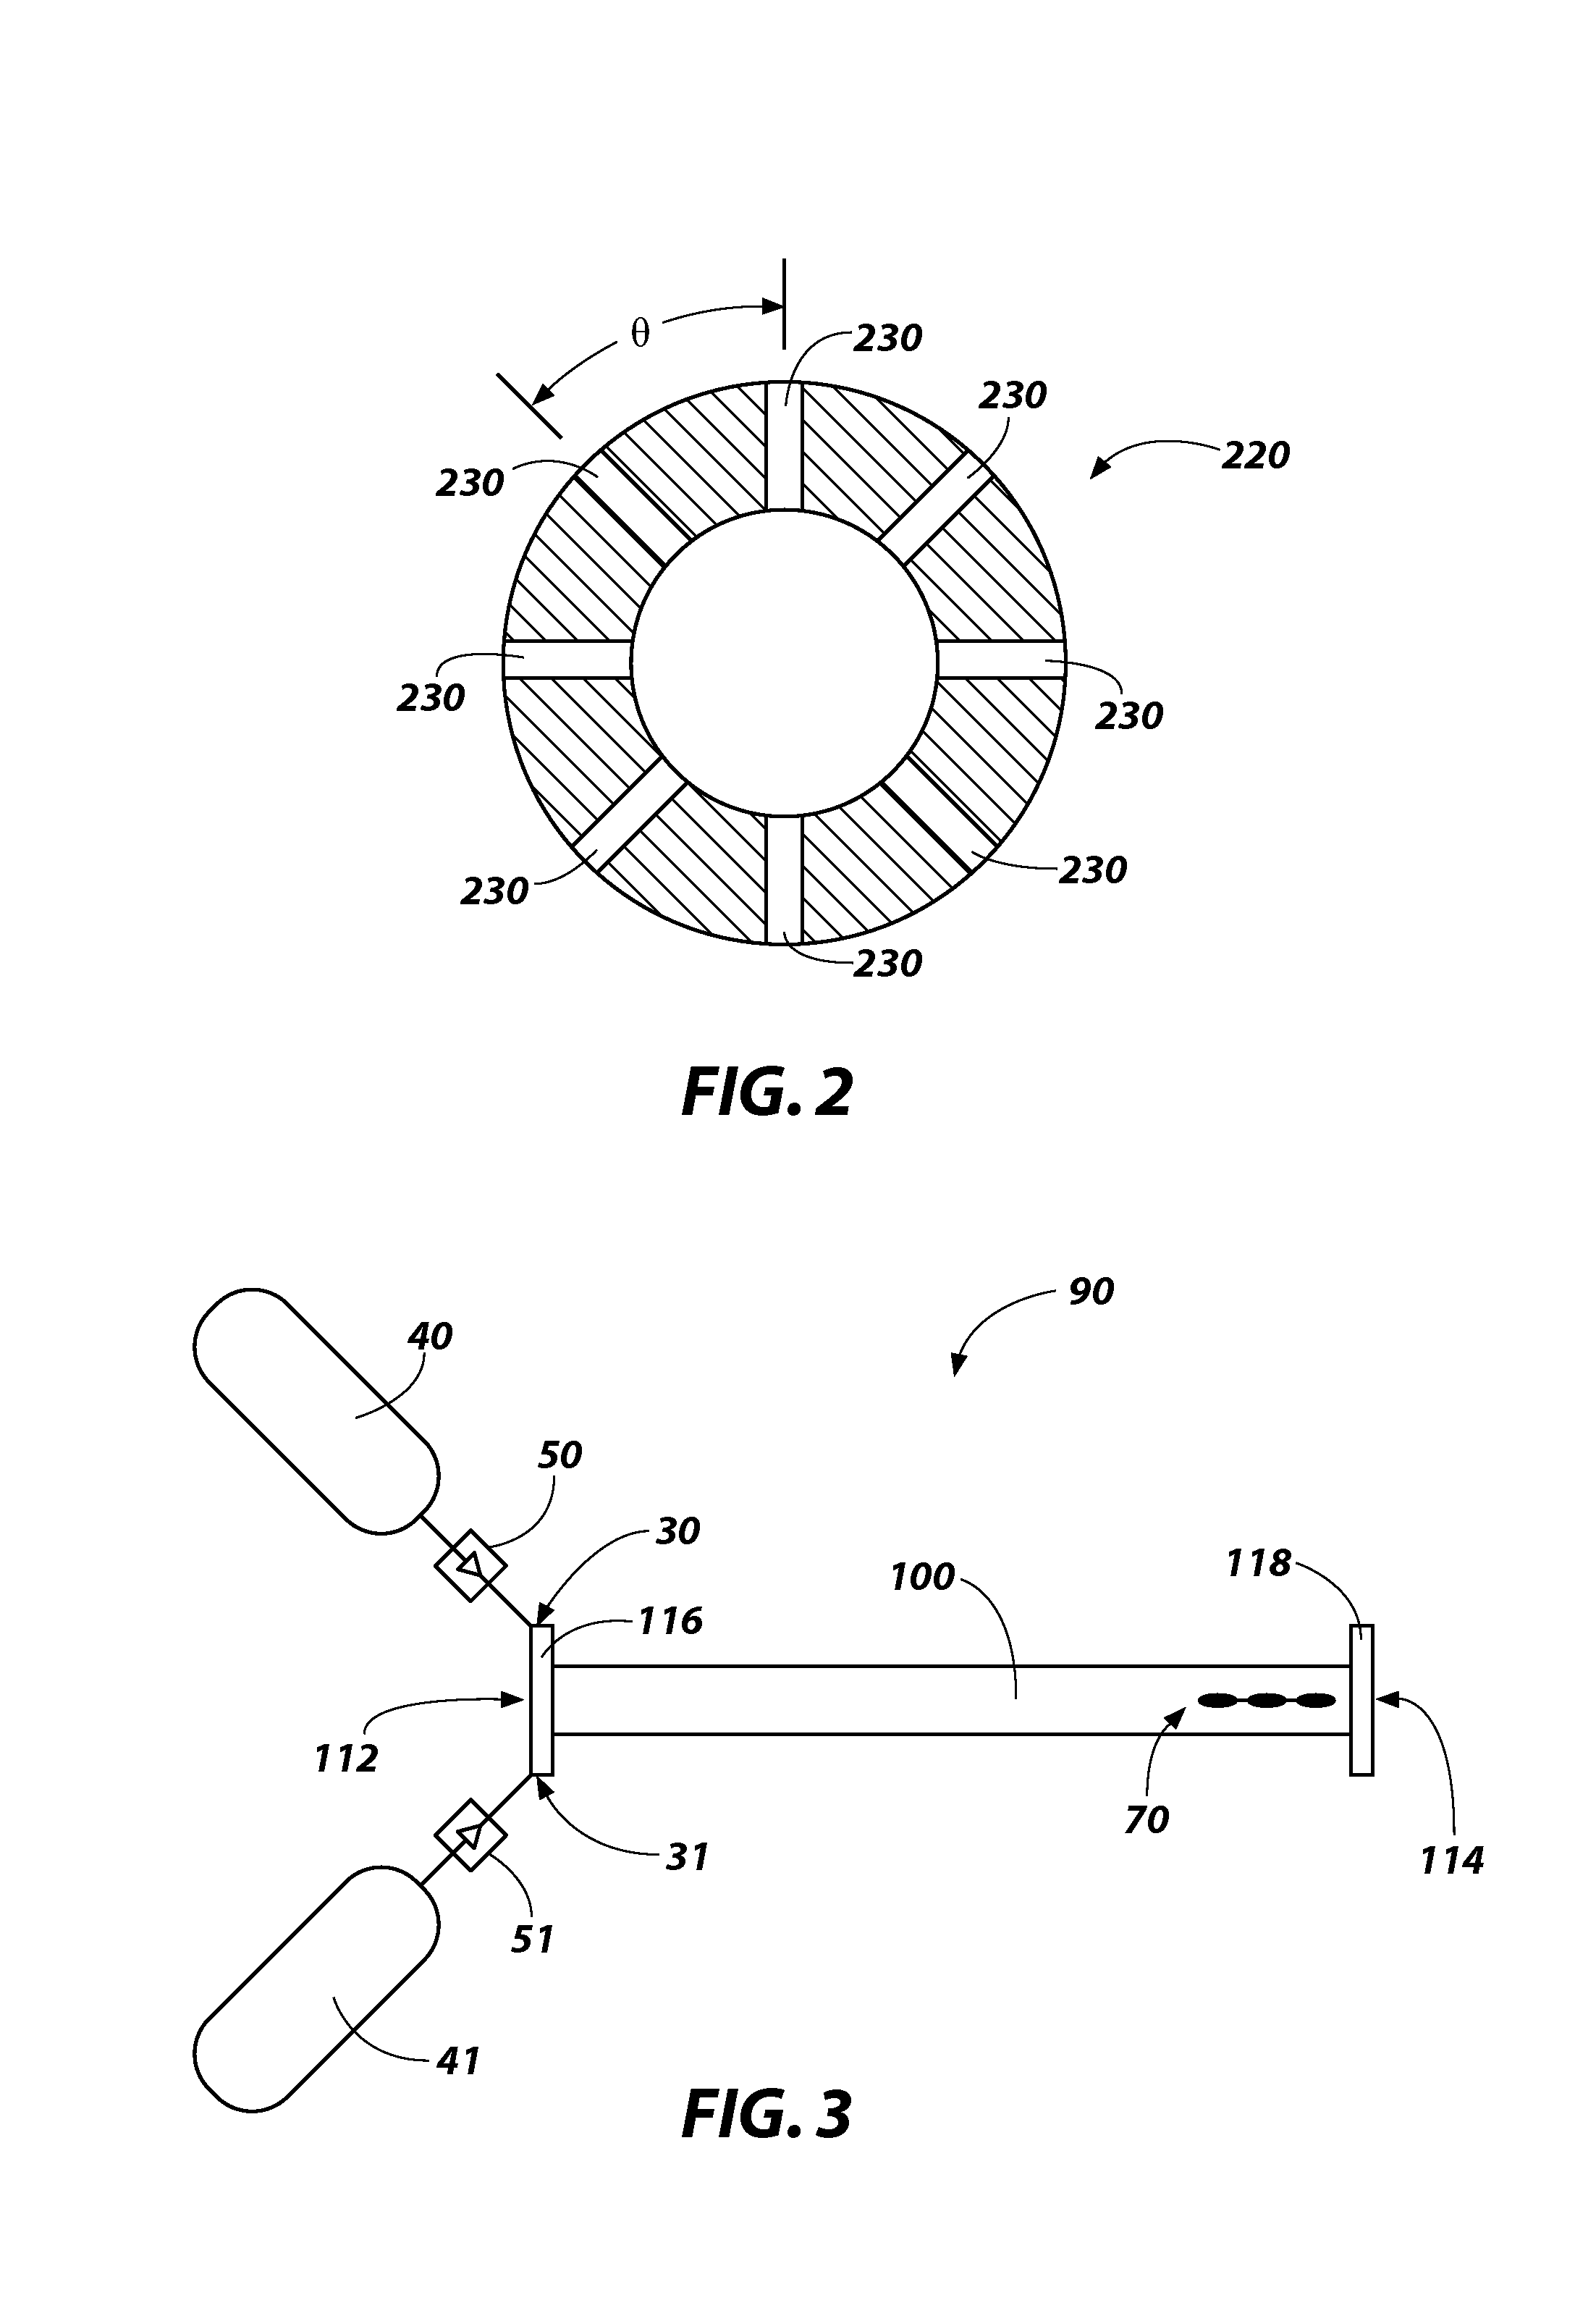 Sequential injection gas guns for accelerating projectiles